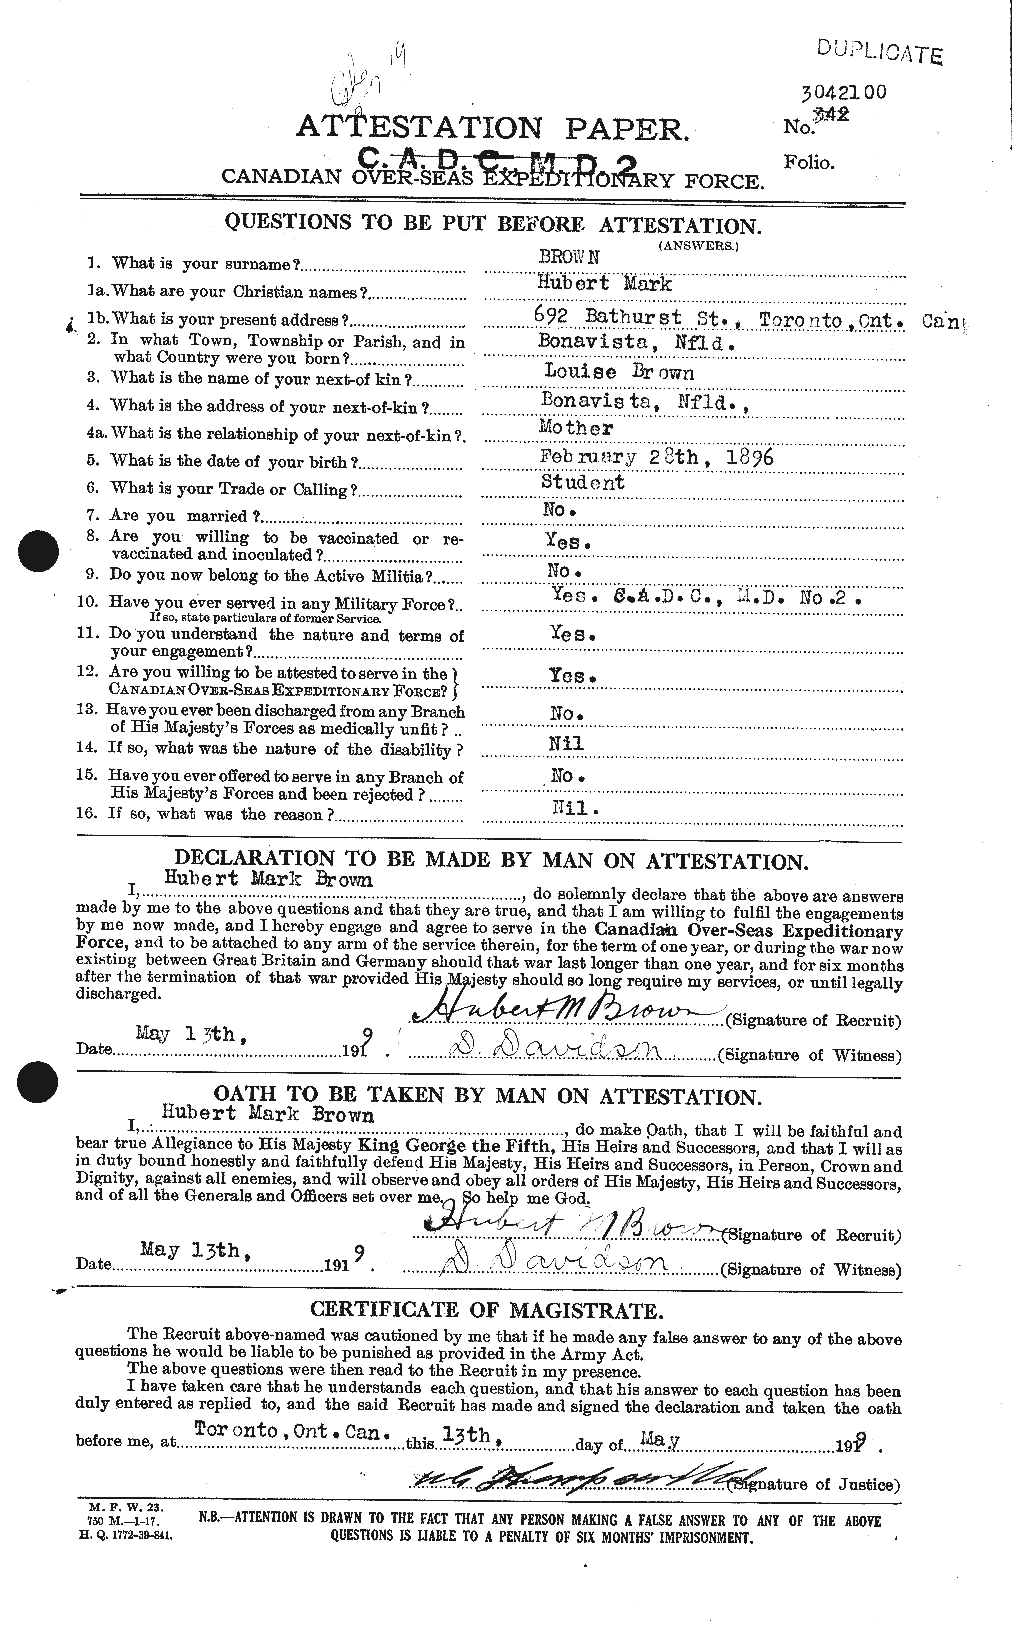 Personnel Records of the First World War - CEF 265627a